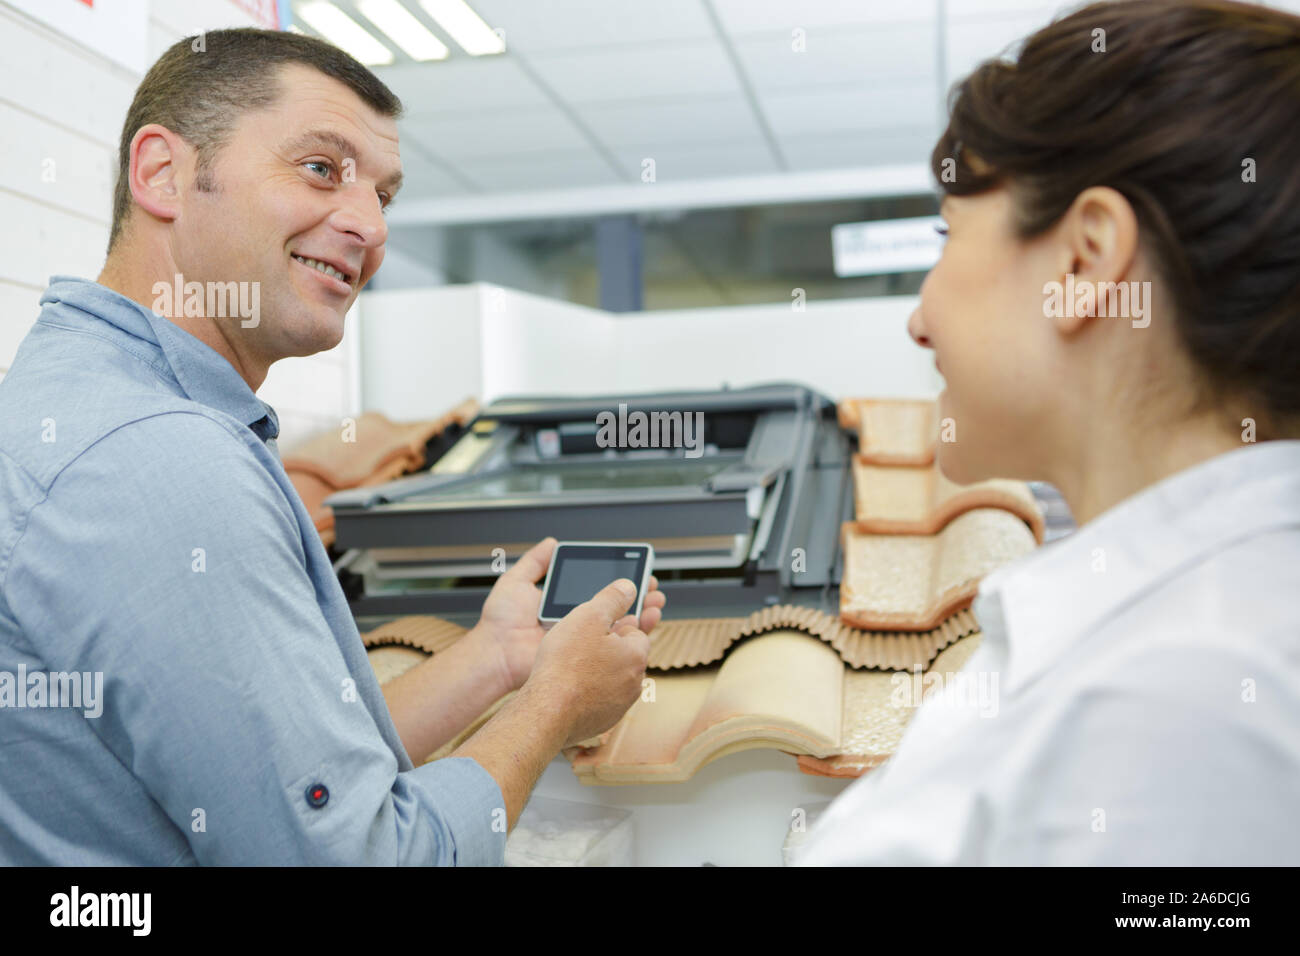 salesman showing rooflight controller to interested client Stock Photo